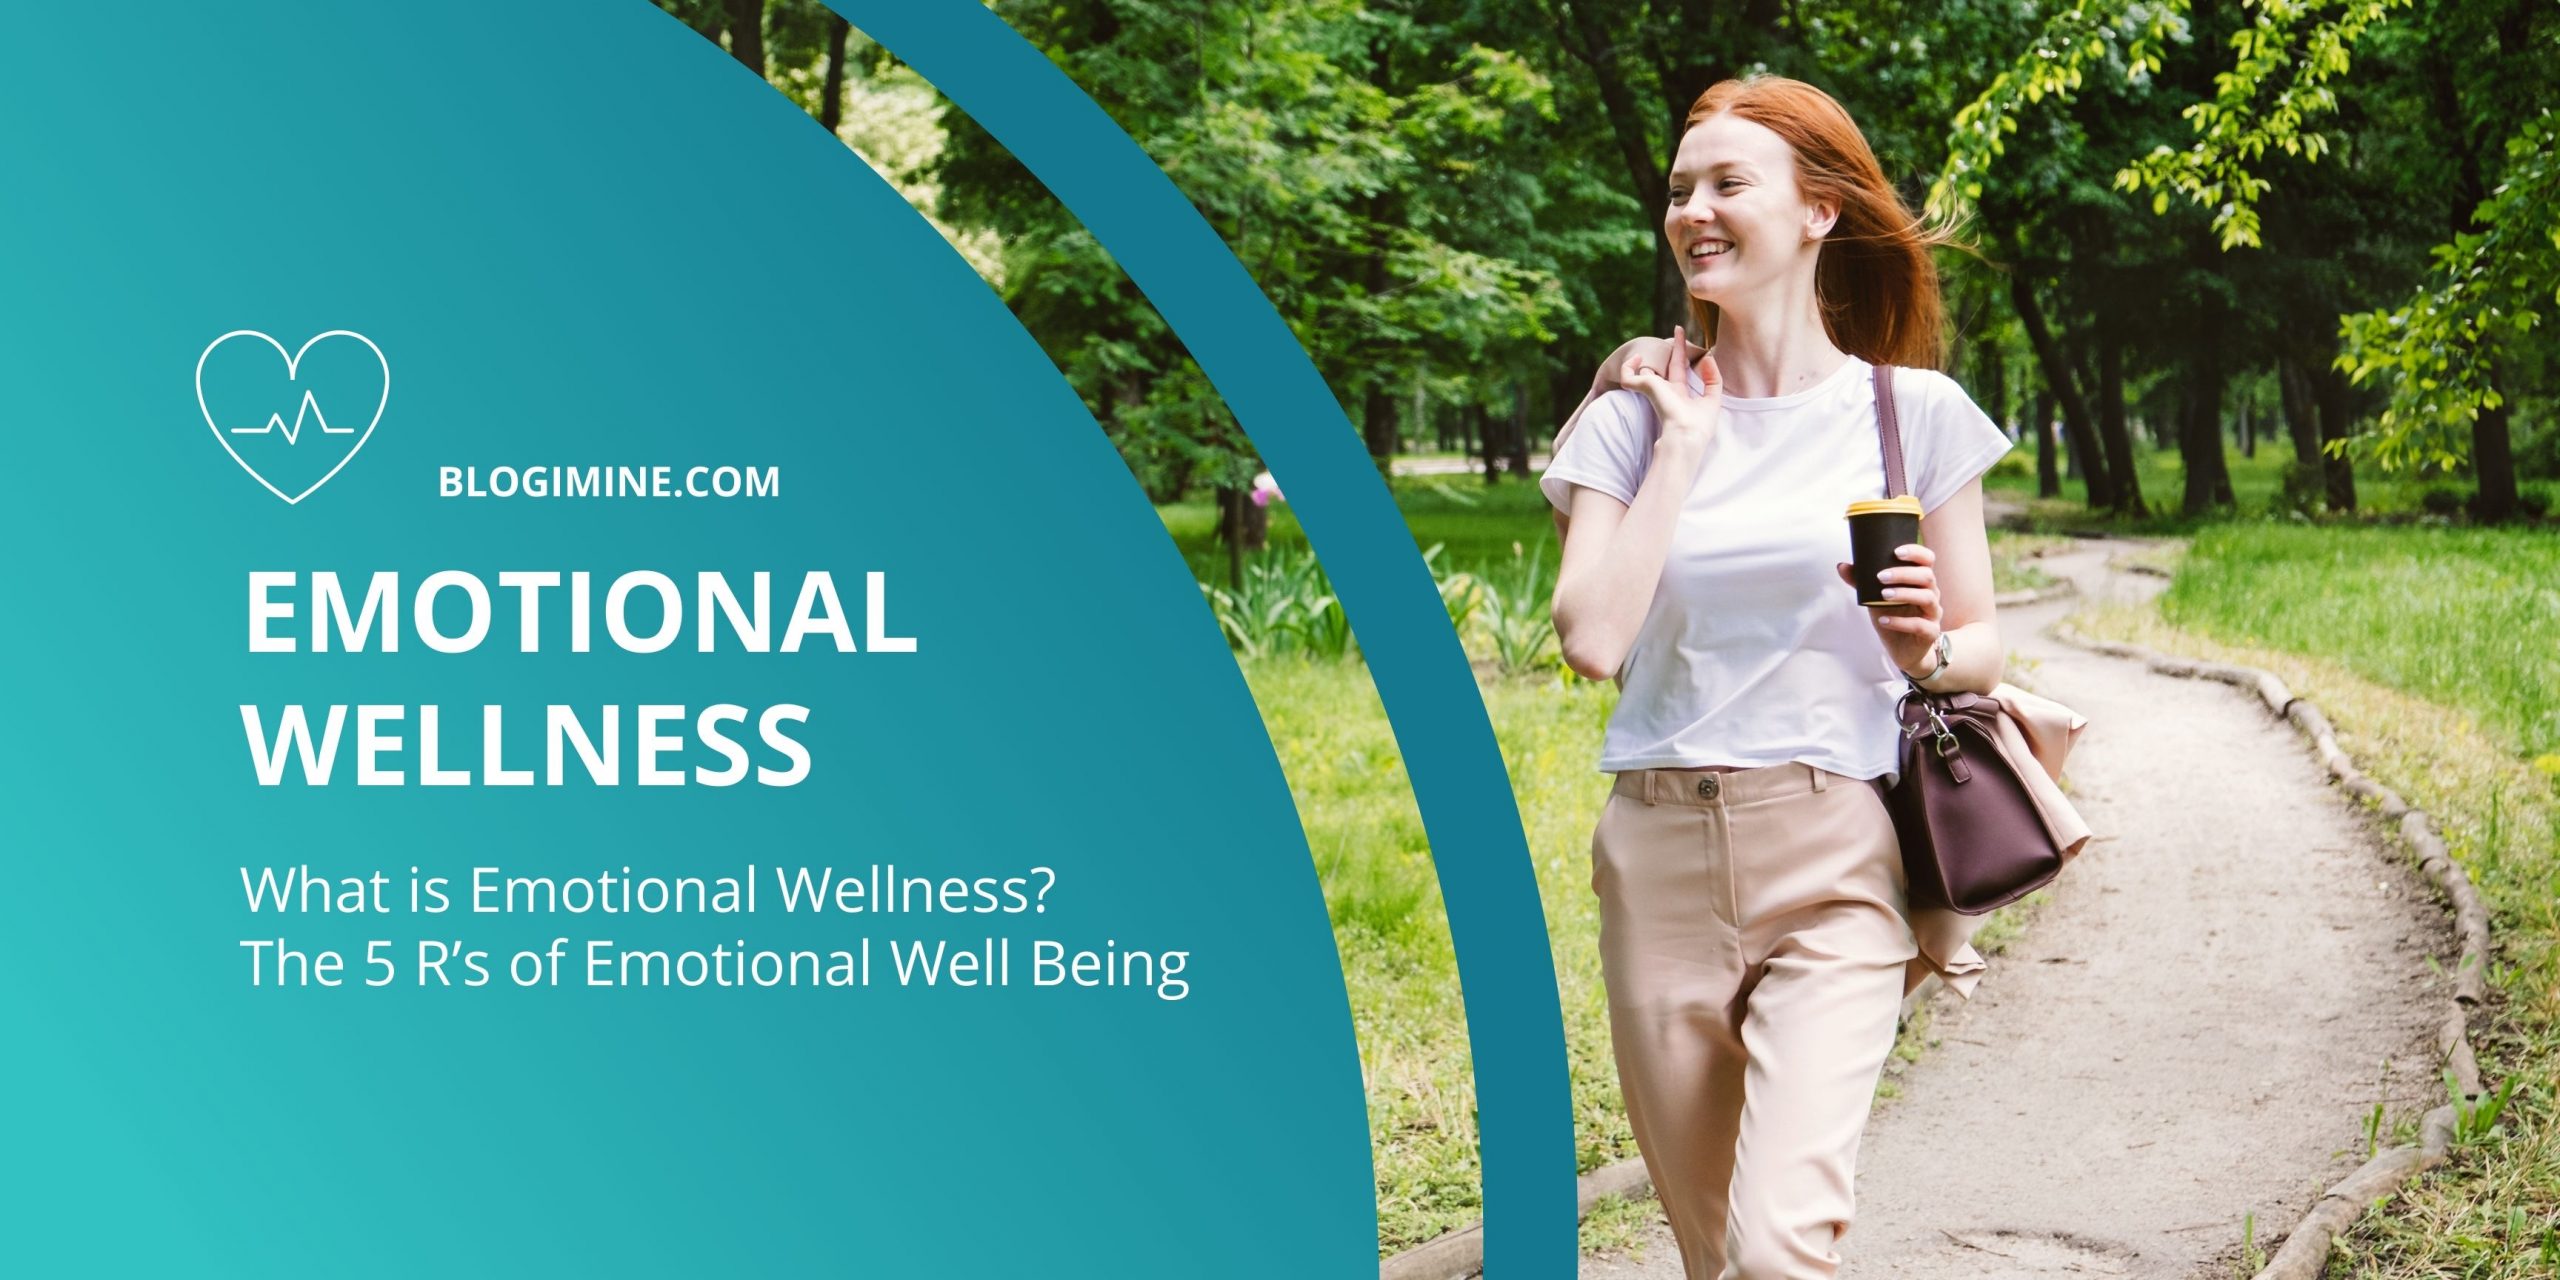 What is Emotional Wellness